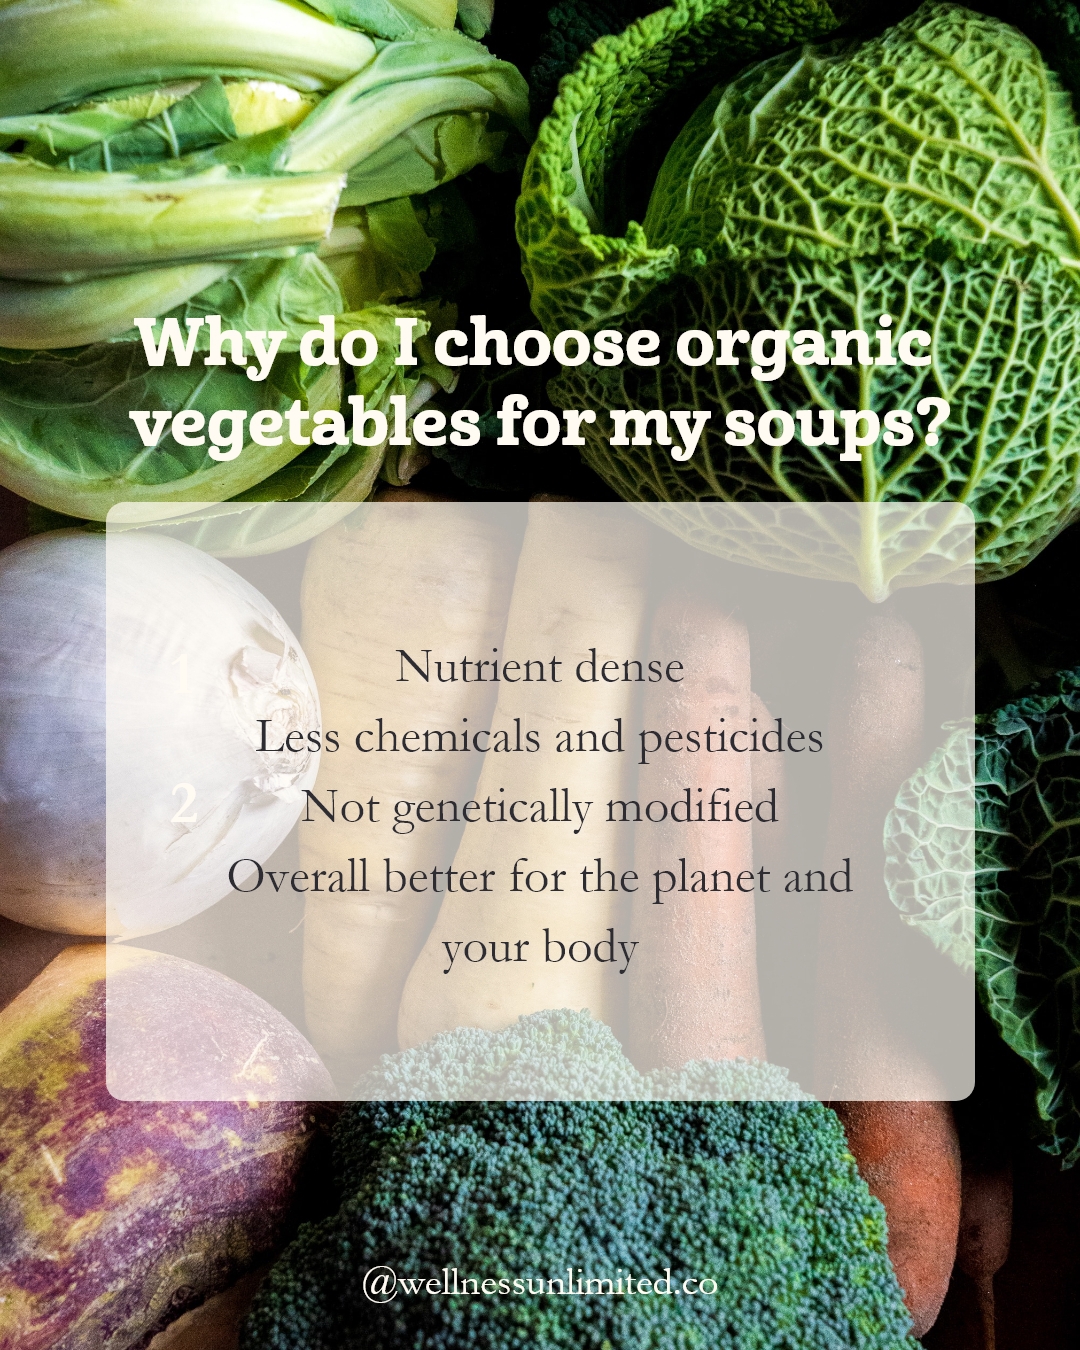 Why choose organic vegetables for soups